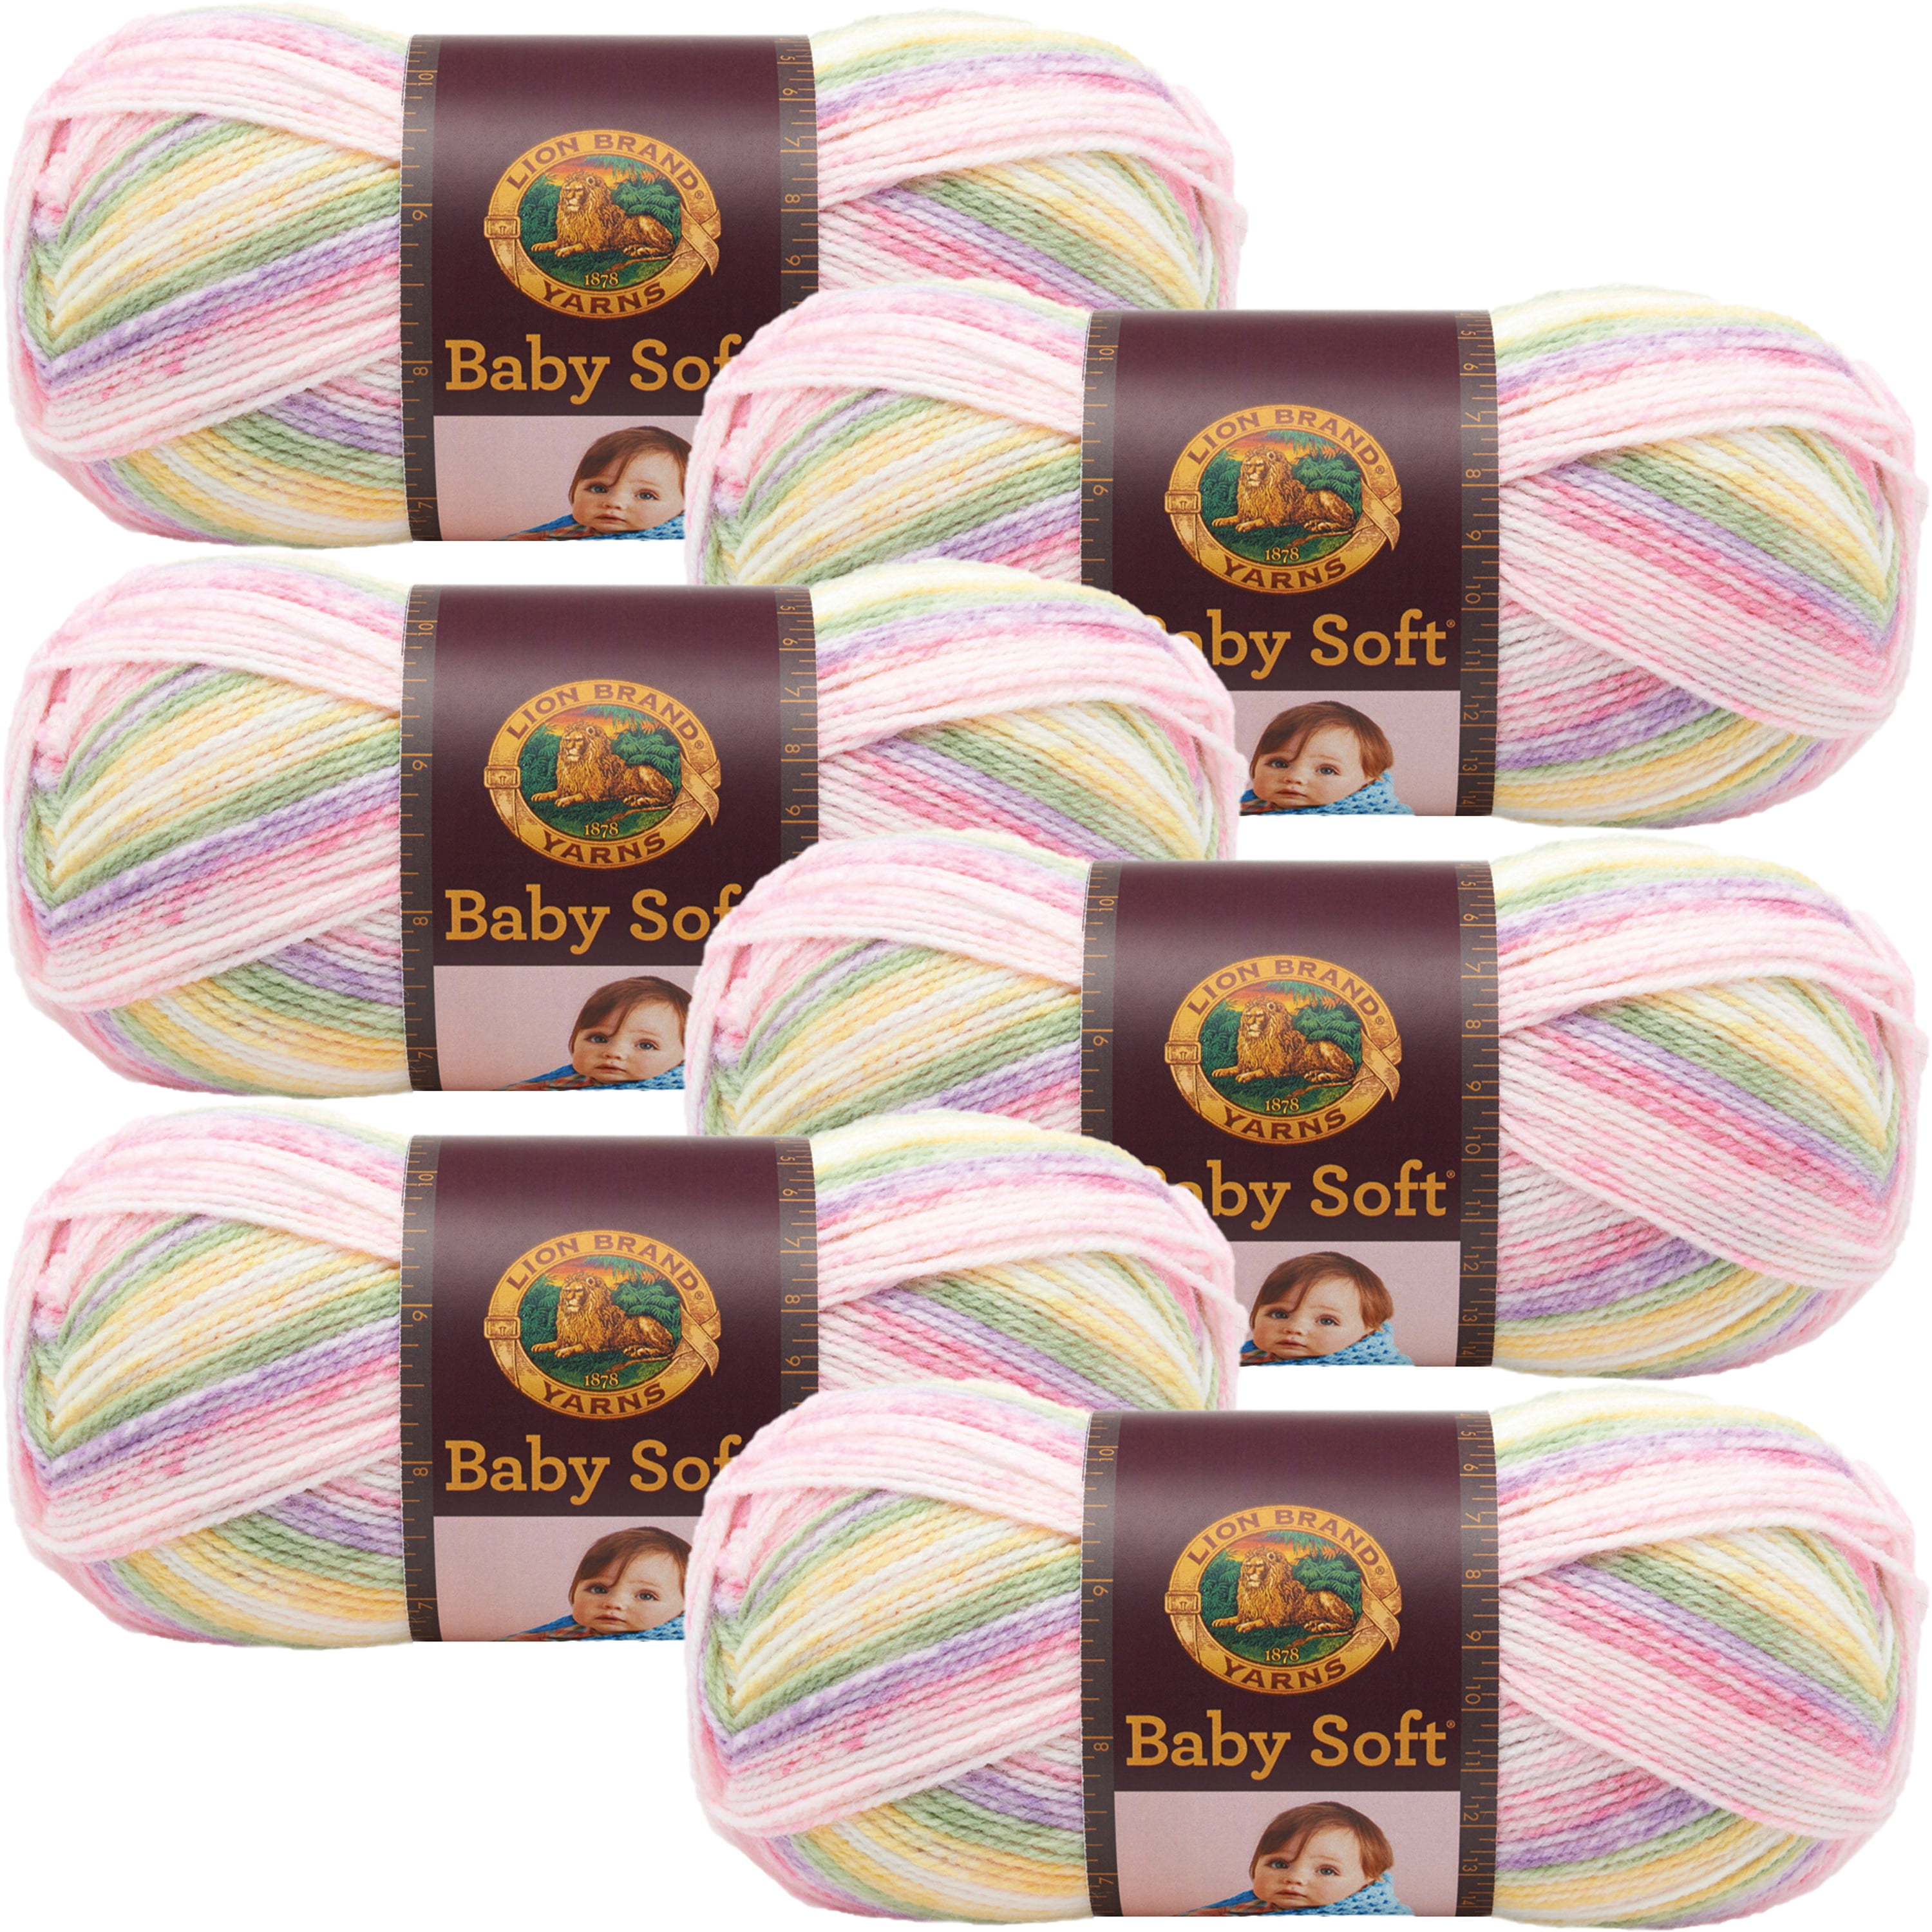 Lion Brand Baby Soft Yarn-Circus Print, Multipack Of 6 